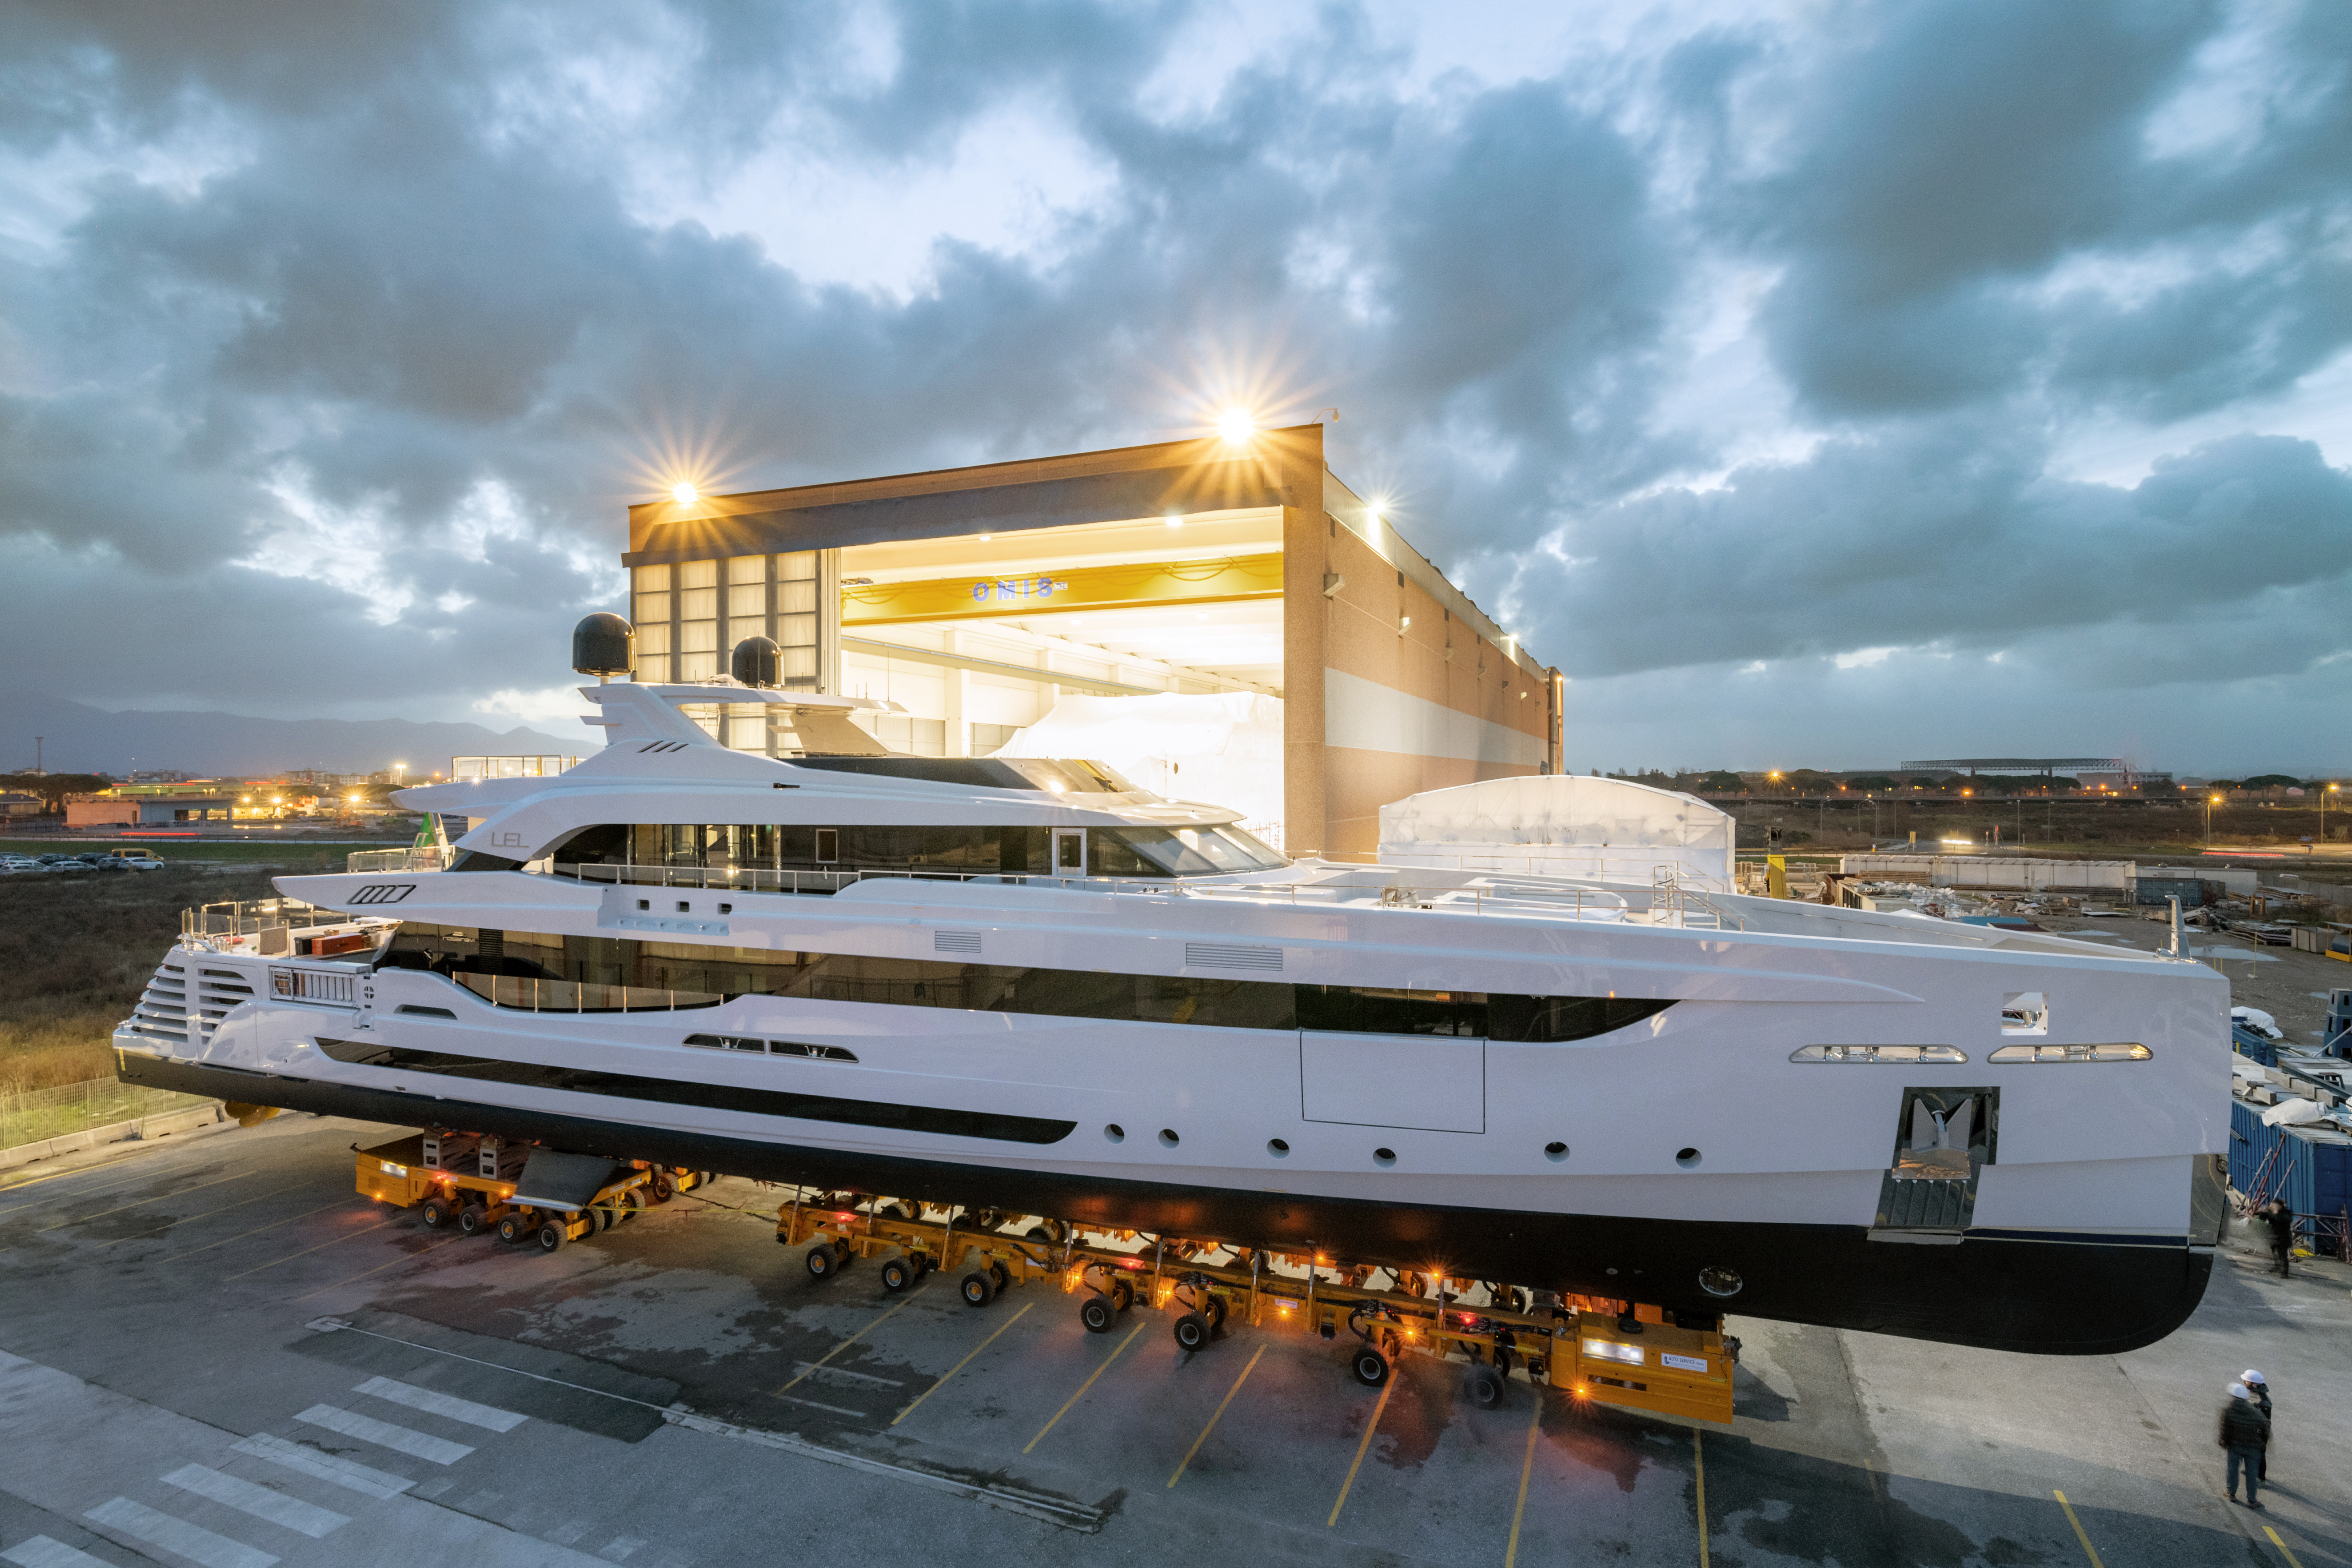 Luxury Yacht LEL Getting Ready For Launch Ceremony